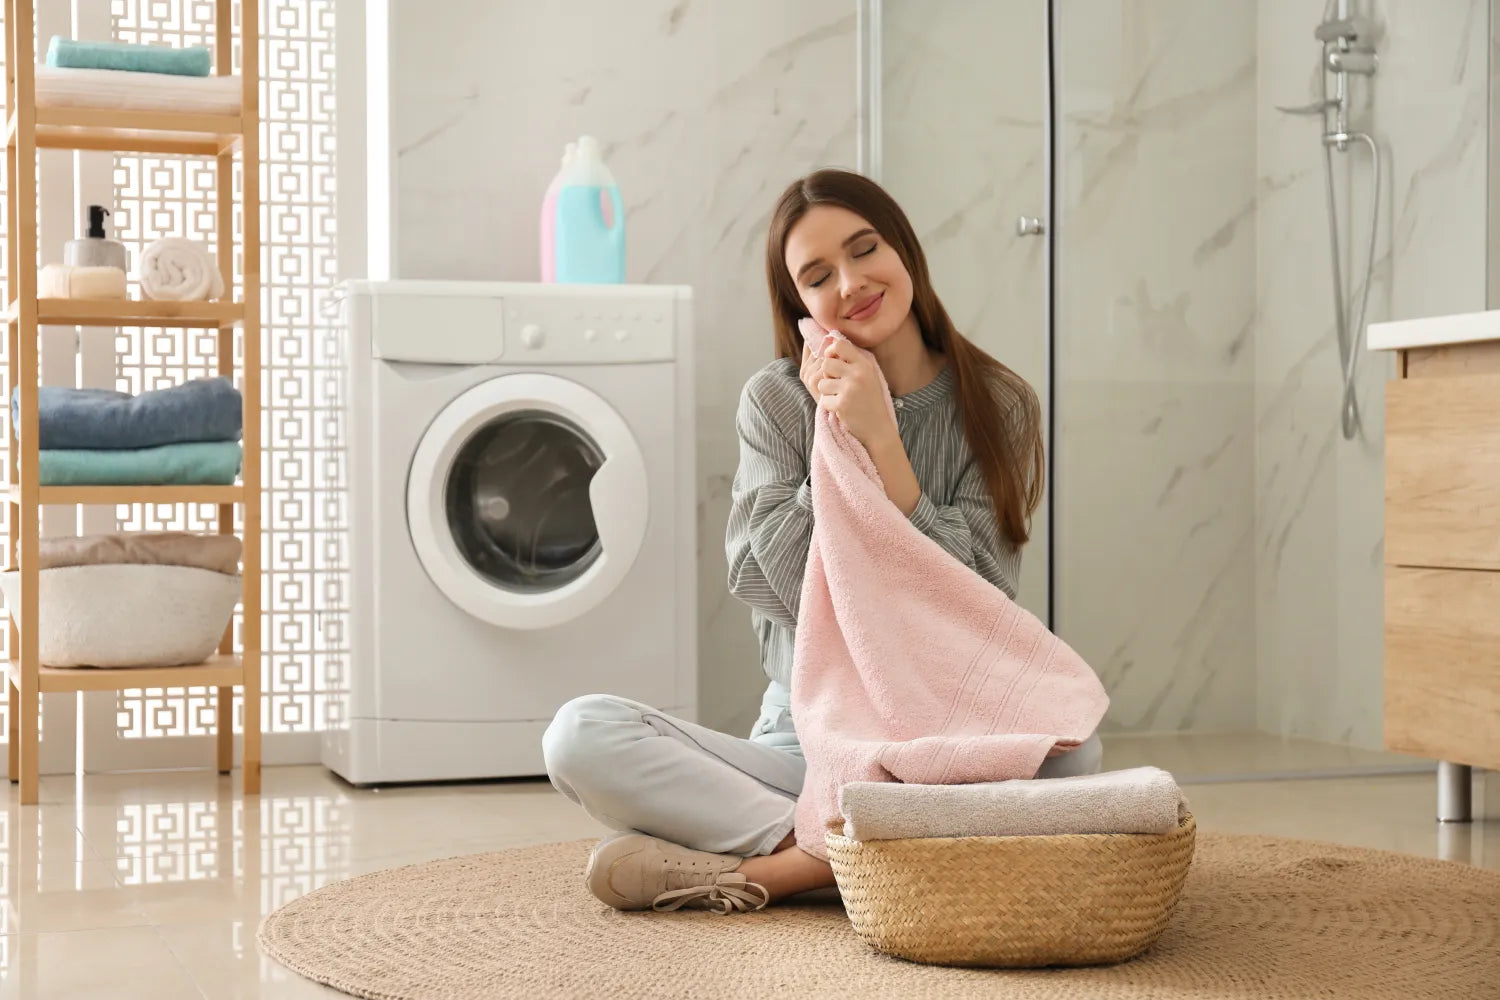 How To Keep Your Towels Fluffy, Soft & Absorbent [Laundry Tips